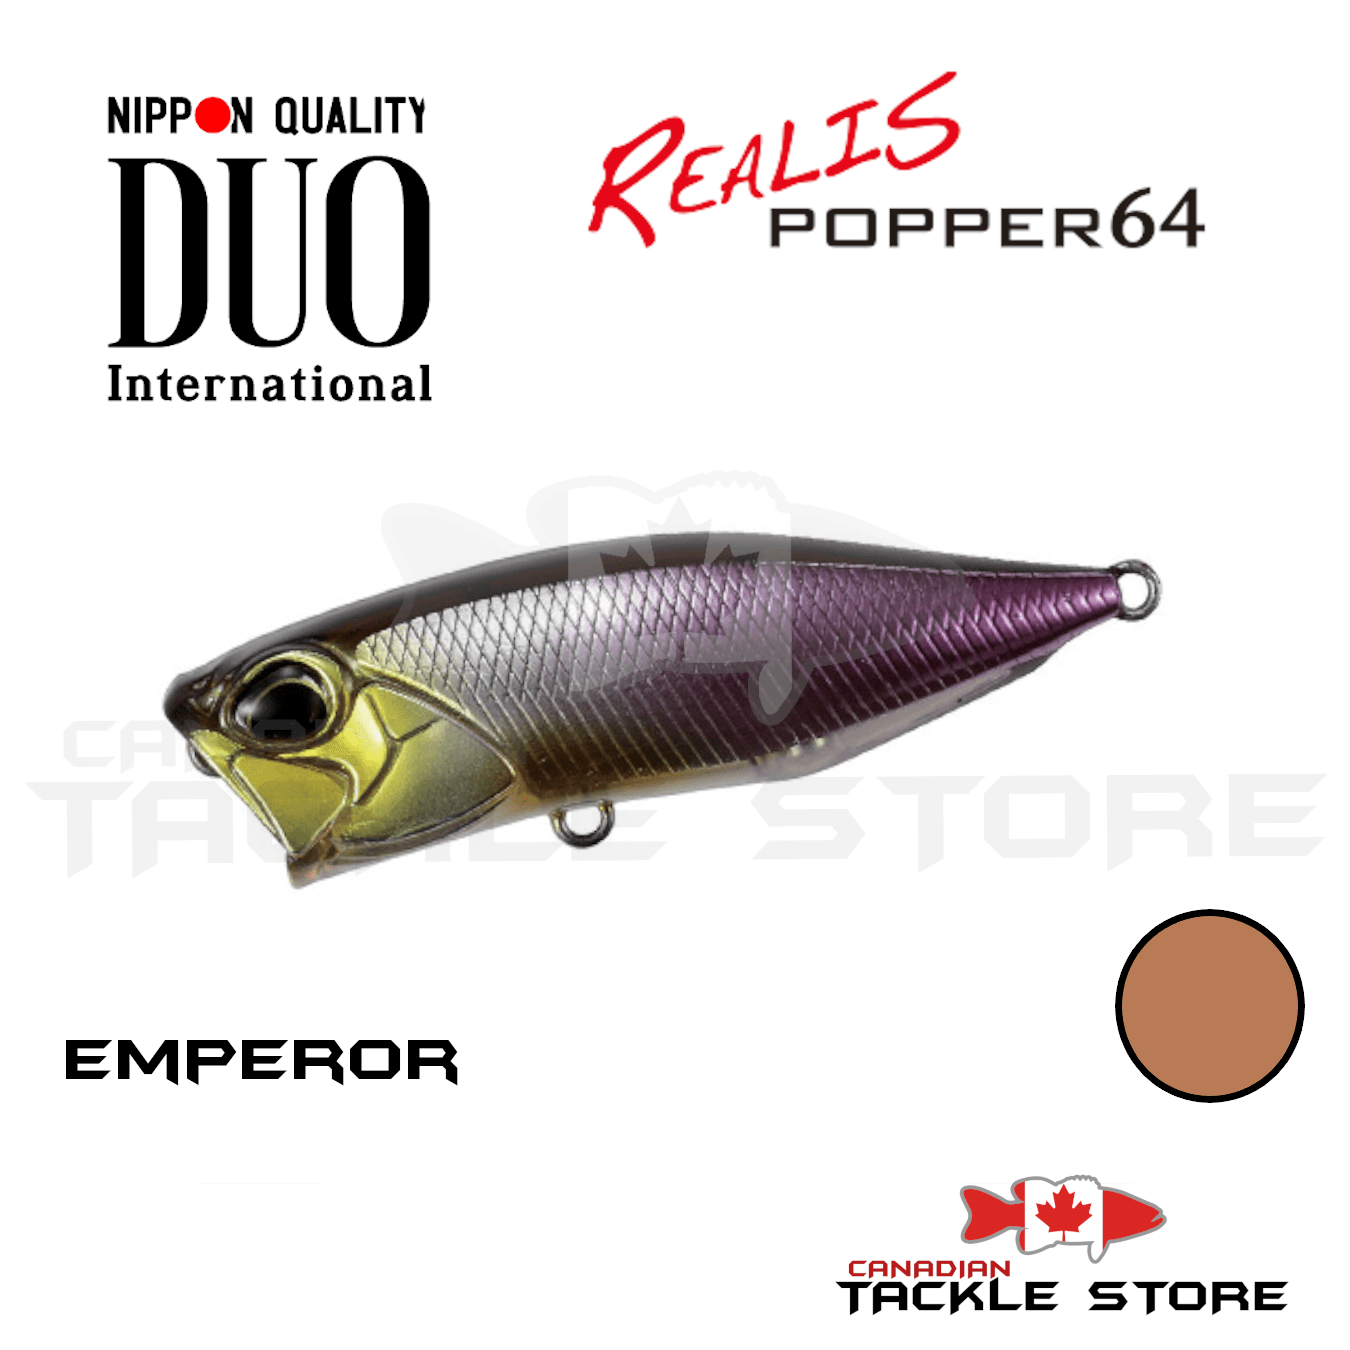 Duo Realis Popper 64 – Canadian Tackle Store